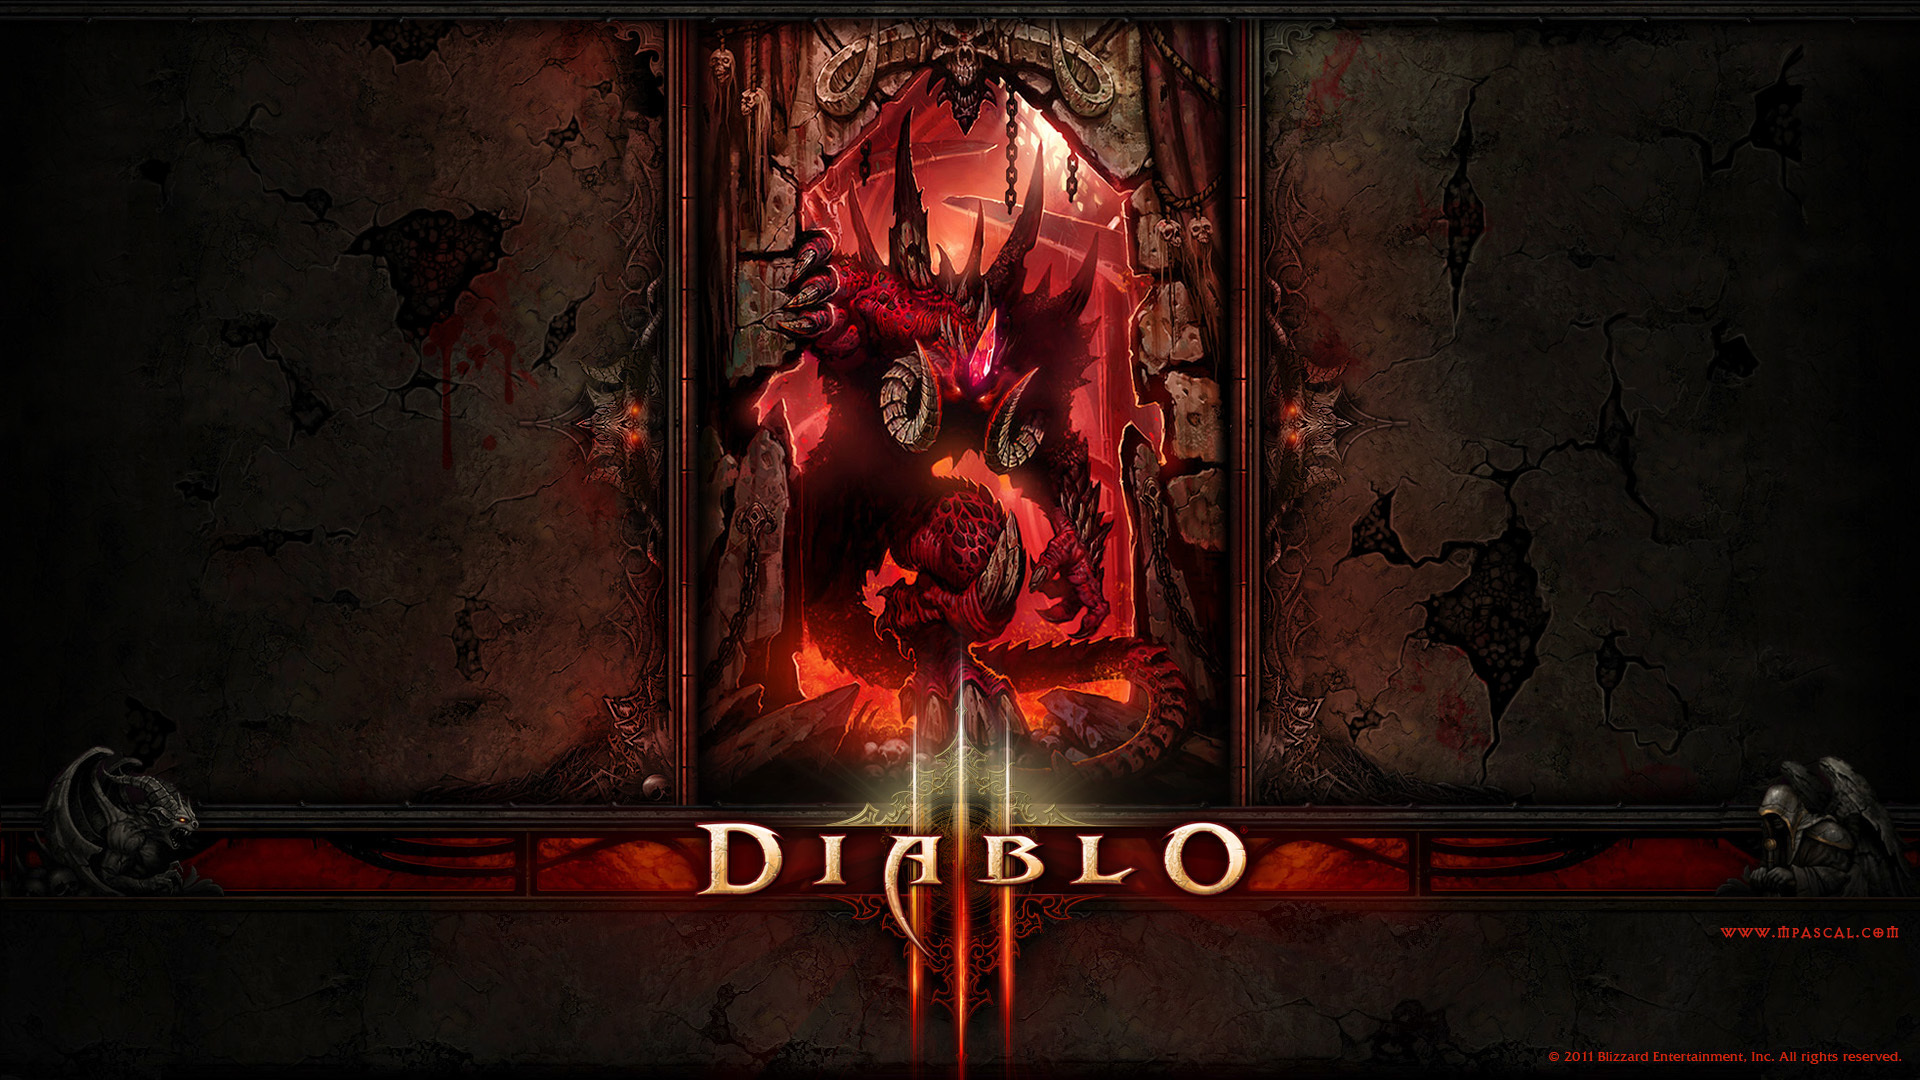 Diablo Iii The Devil HD Wallpaper And Image Pictures